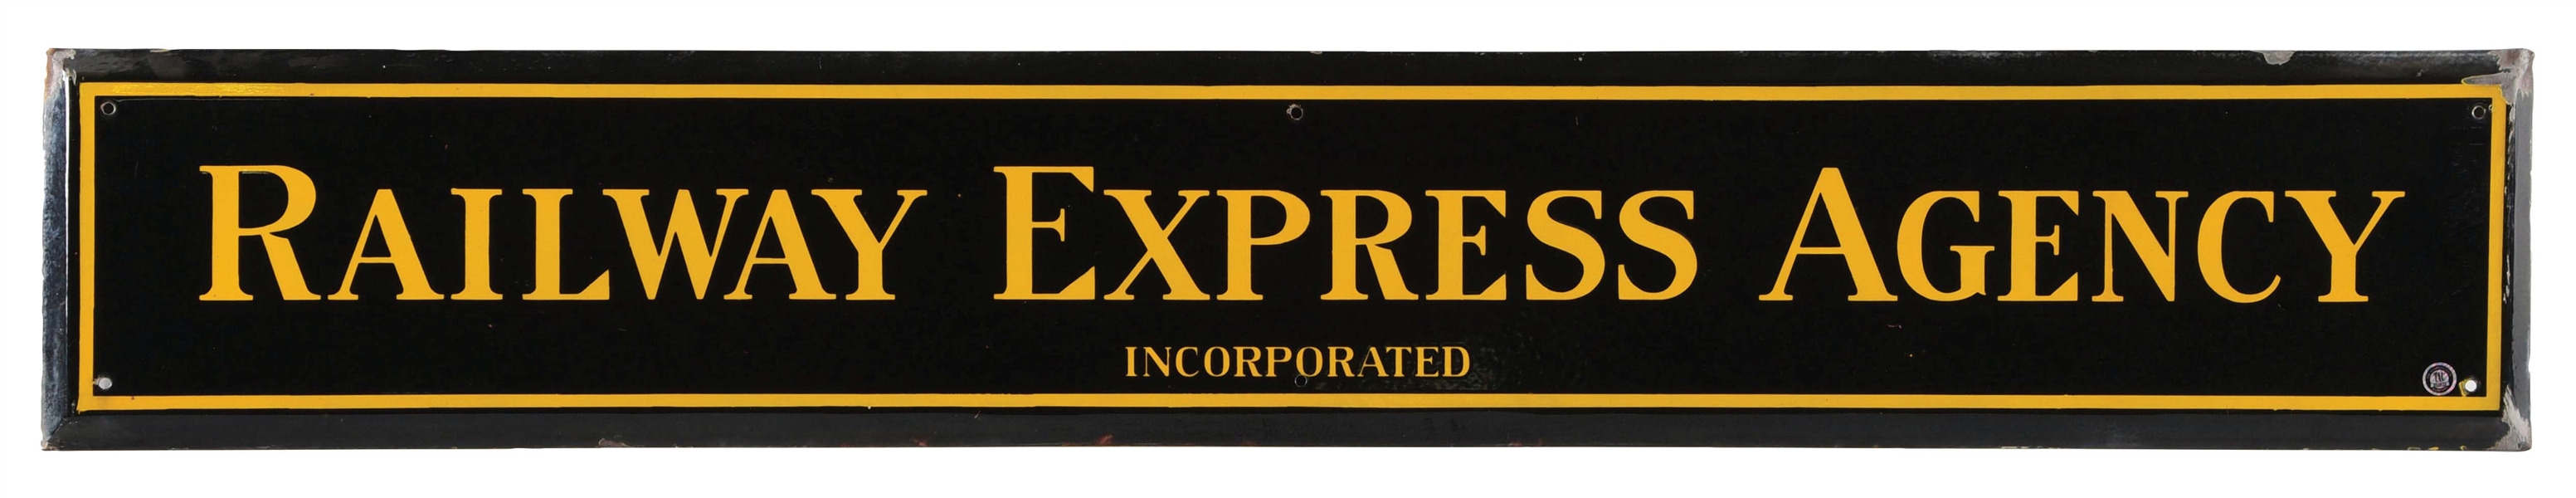 RAILWAY EXPRESS AGENCY PORCELAIN SIGN W/ SELF FRAMED OUTER EDGE. 